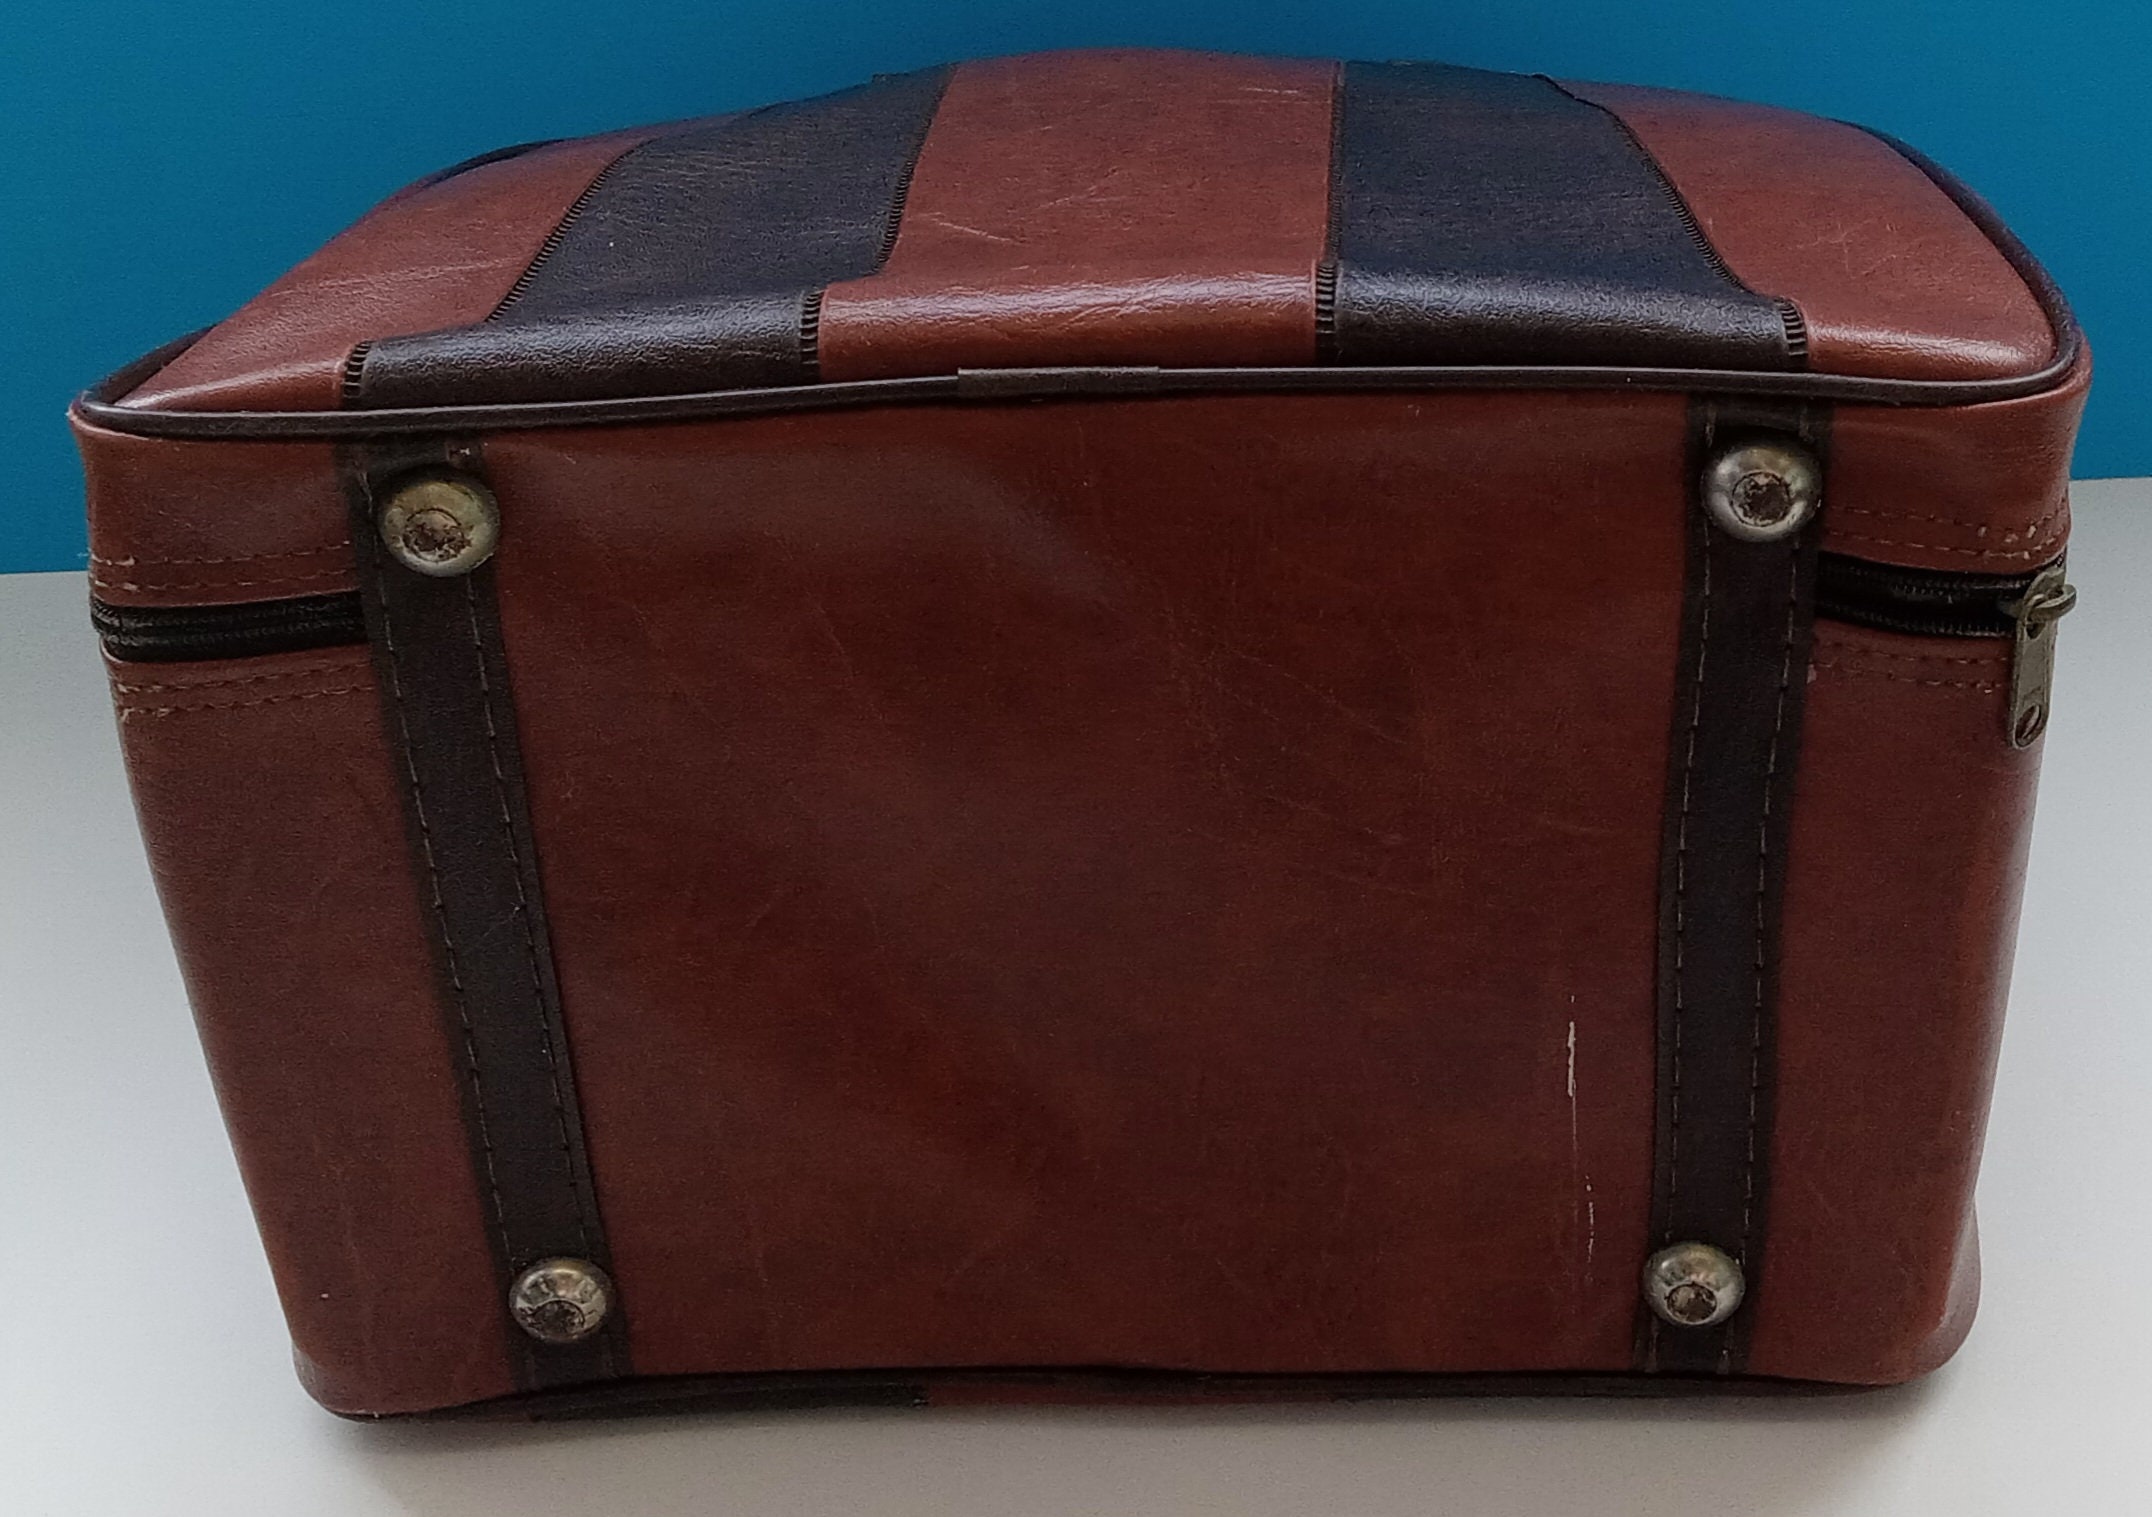 Faux Leather Stebco Bowling Ball Bag With Rack, Sleeve And Tag, Very Good  Condition, With Few Minor Scratches, interior And Exterior is Clean, Bottom  Has Particle Board Base With Fixed Metal Rack